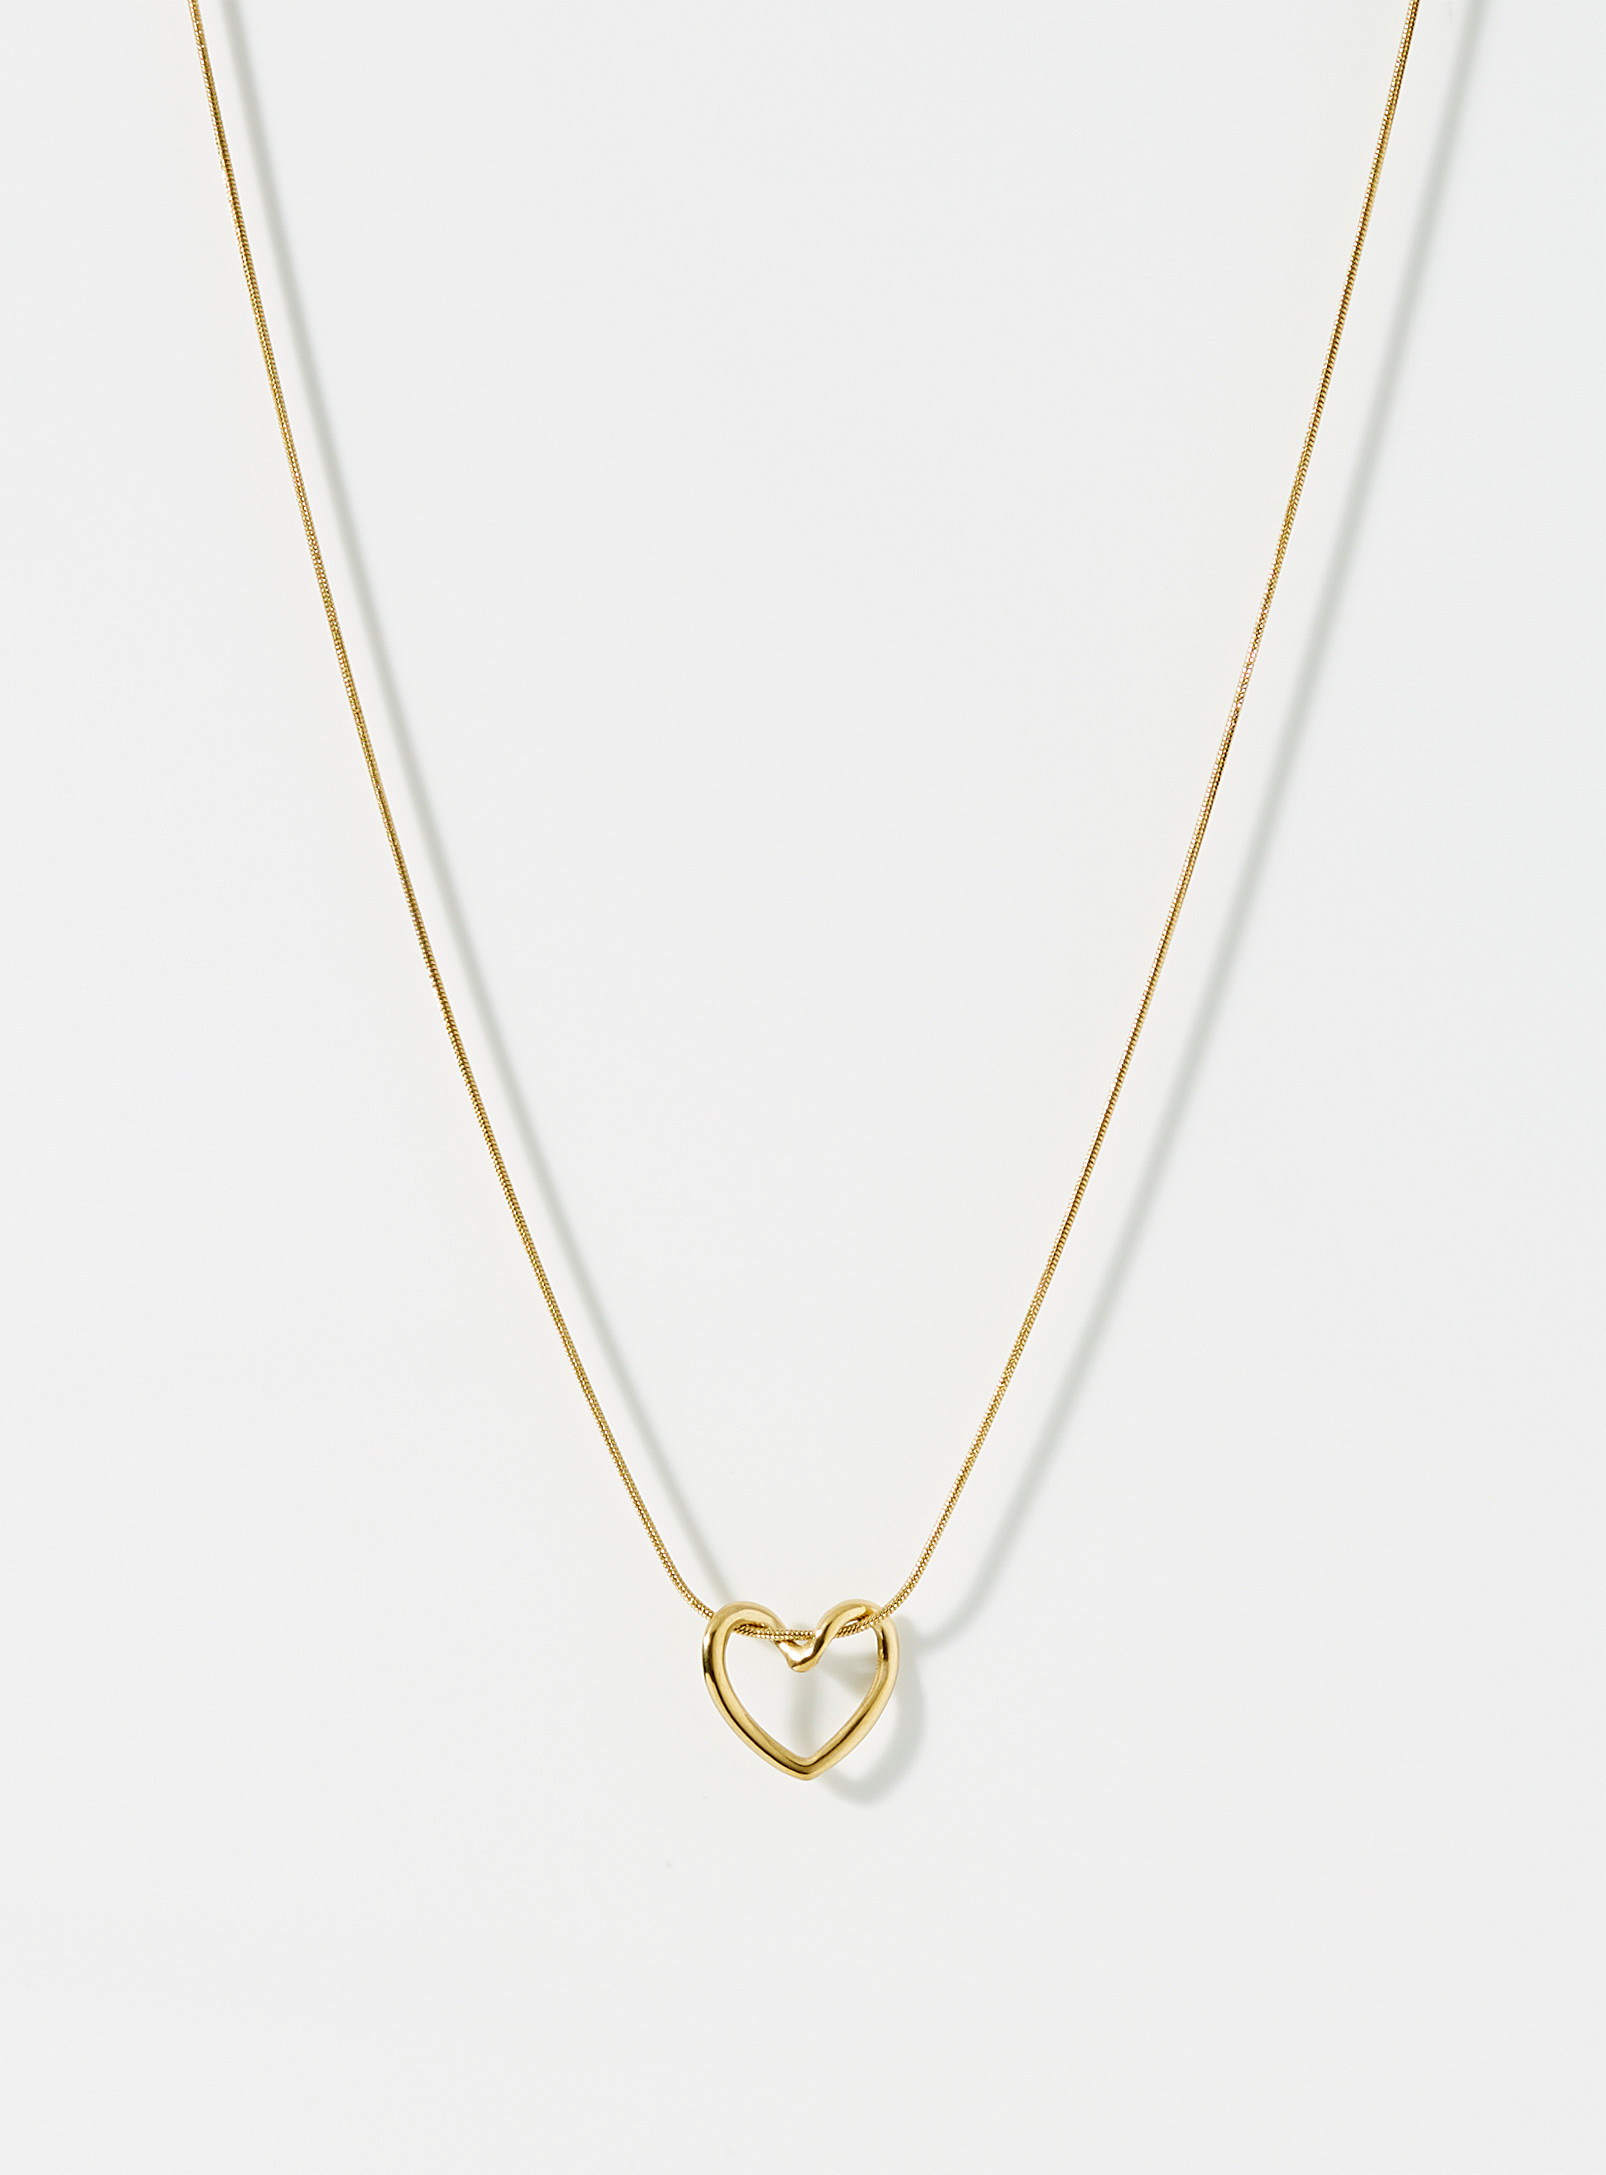 Simons - Women's Twisted heart golden necklace